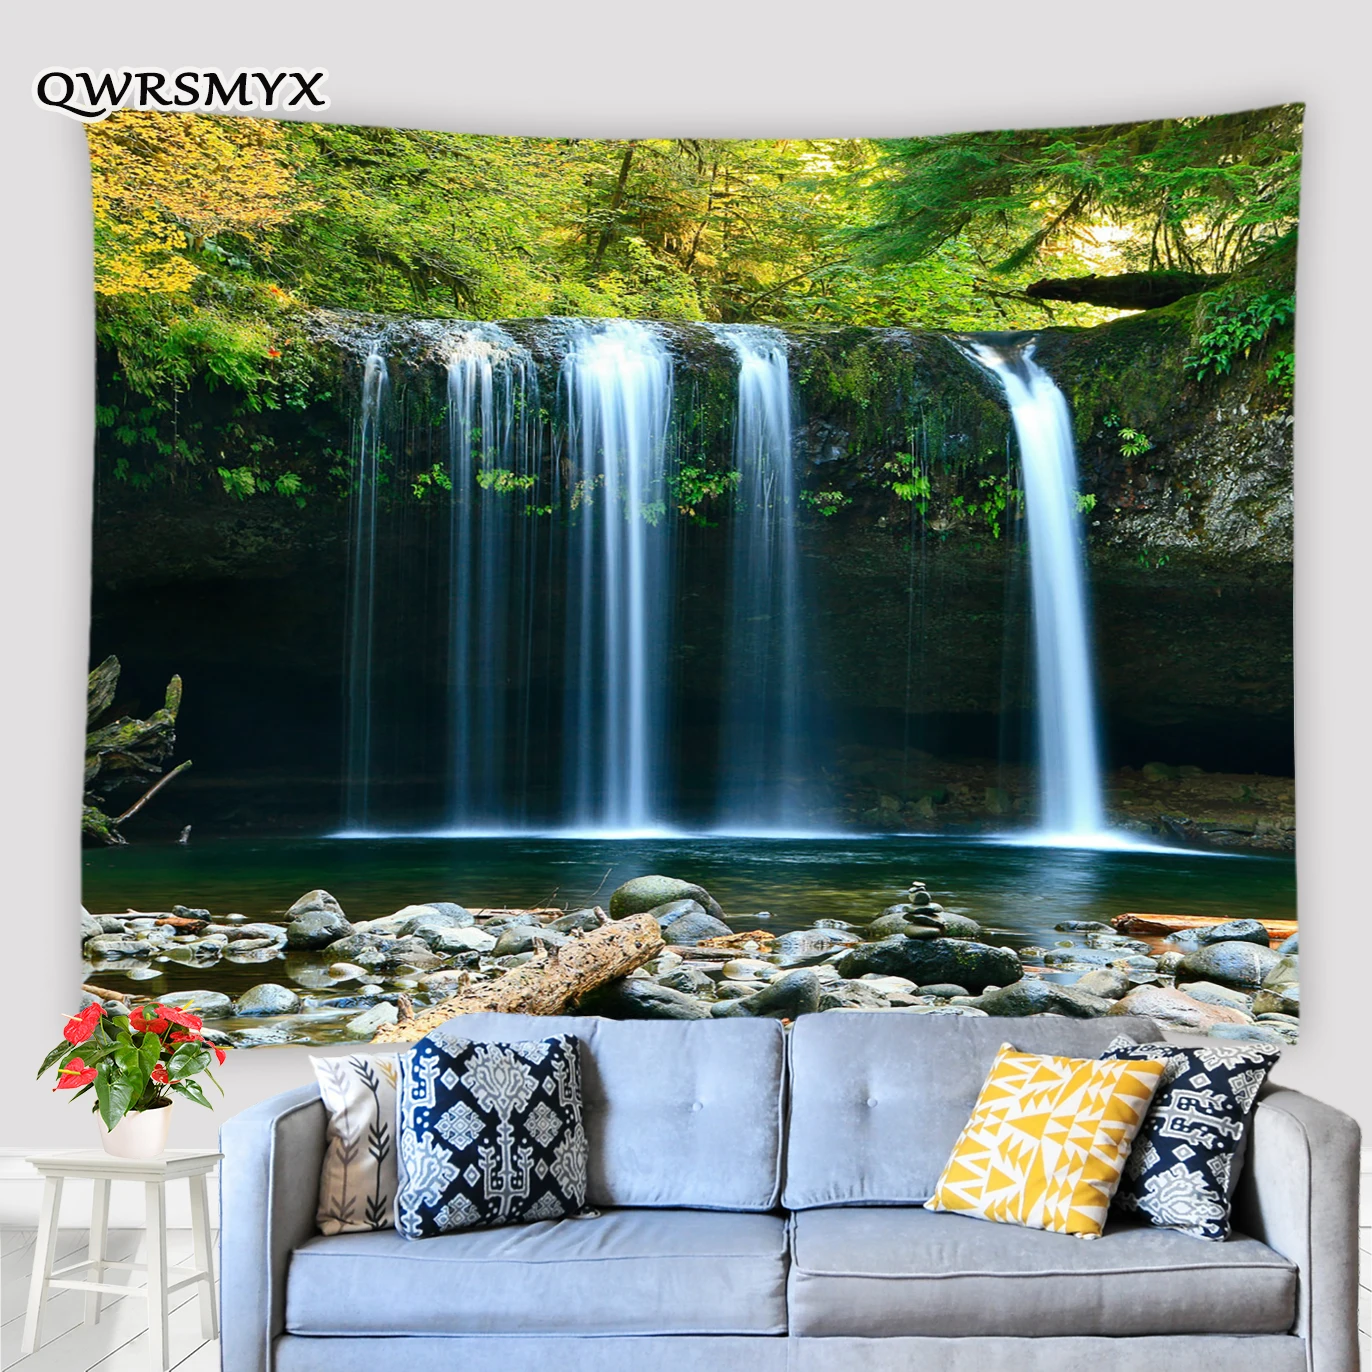 

Green Forest Waterfall Landscape Tapestry Natural Scenery Wall Hanging Living Room Bedroom Decor Wall Aesthetics Art Tapestries